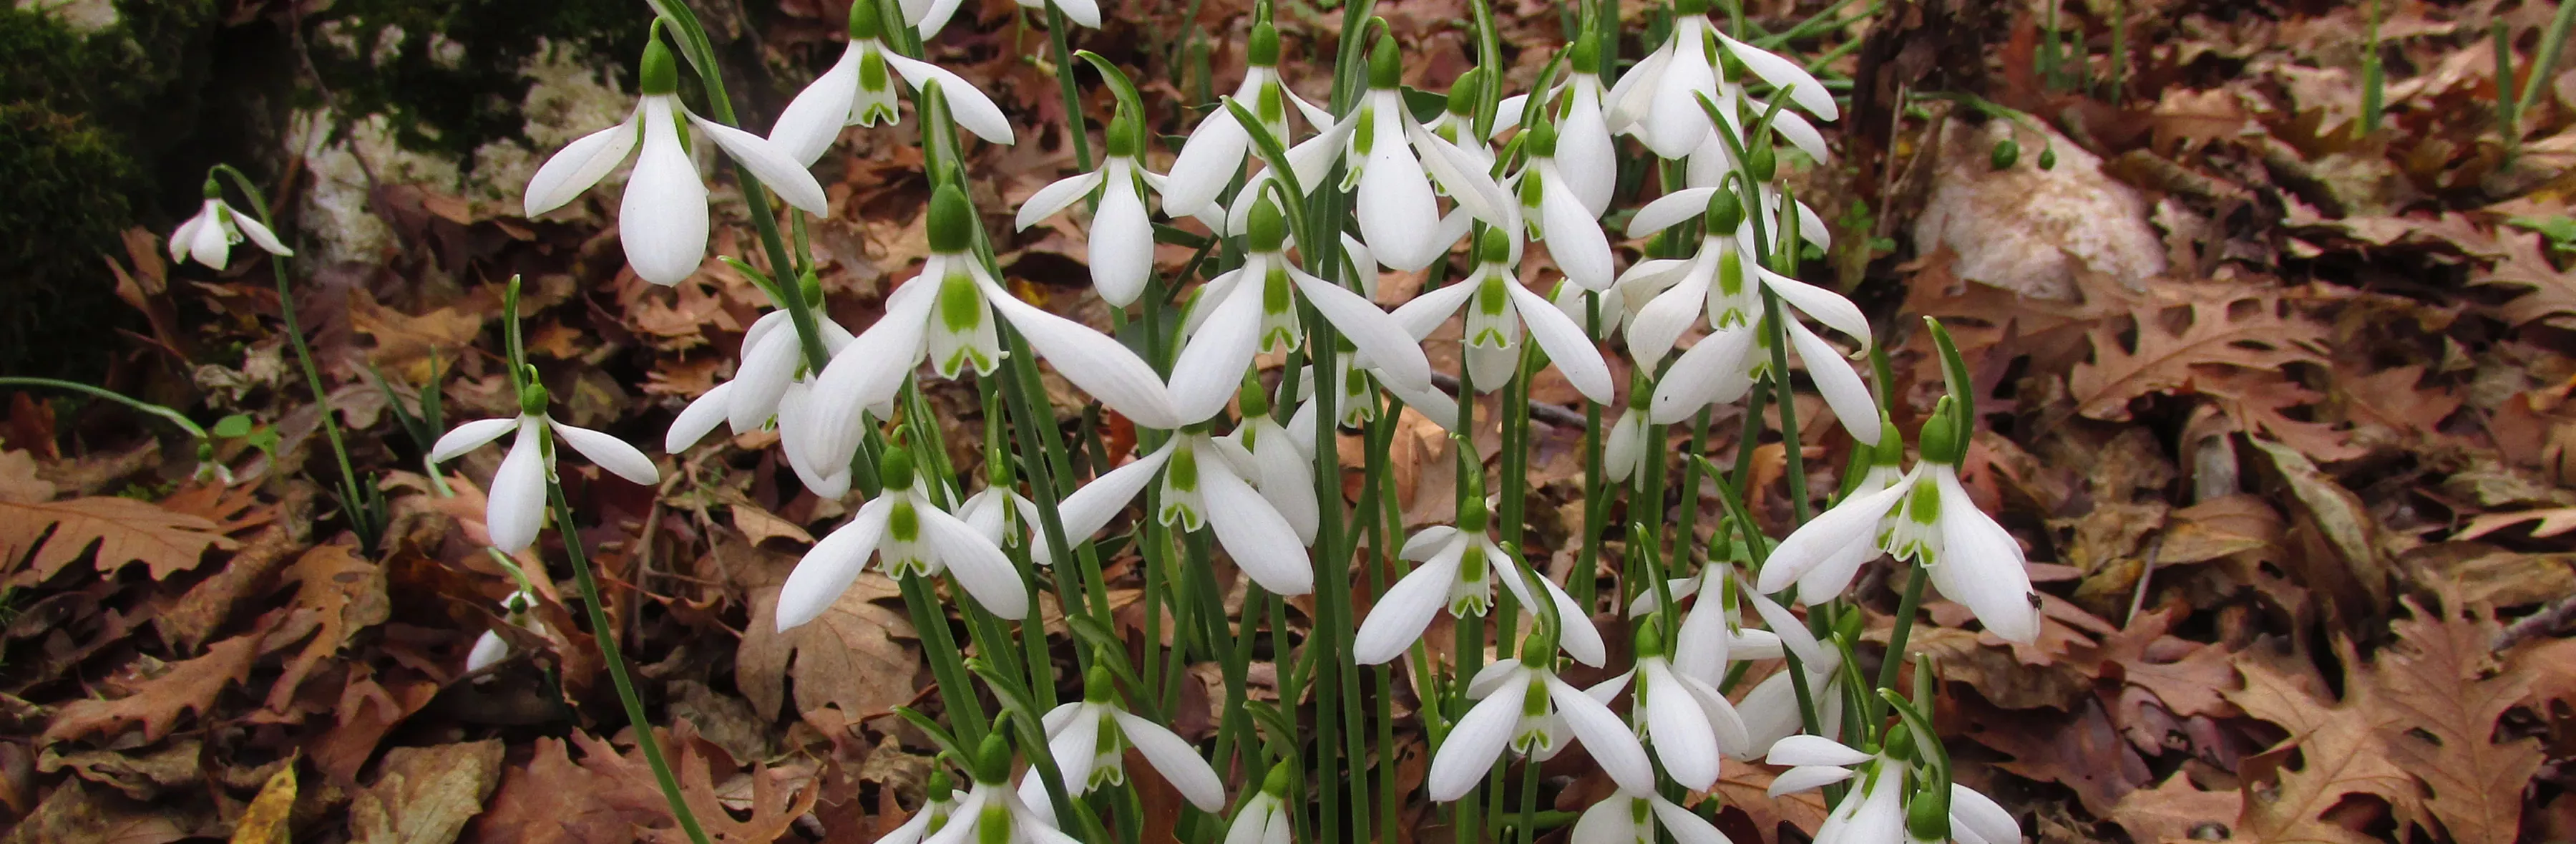 Close up of a cluster of new snowdrops